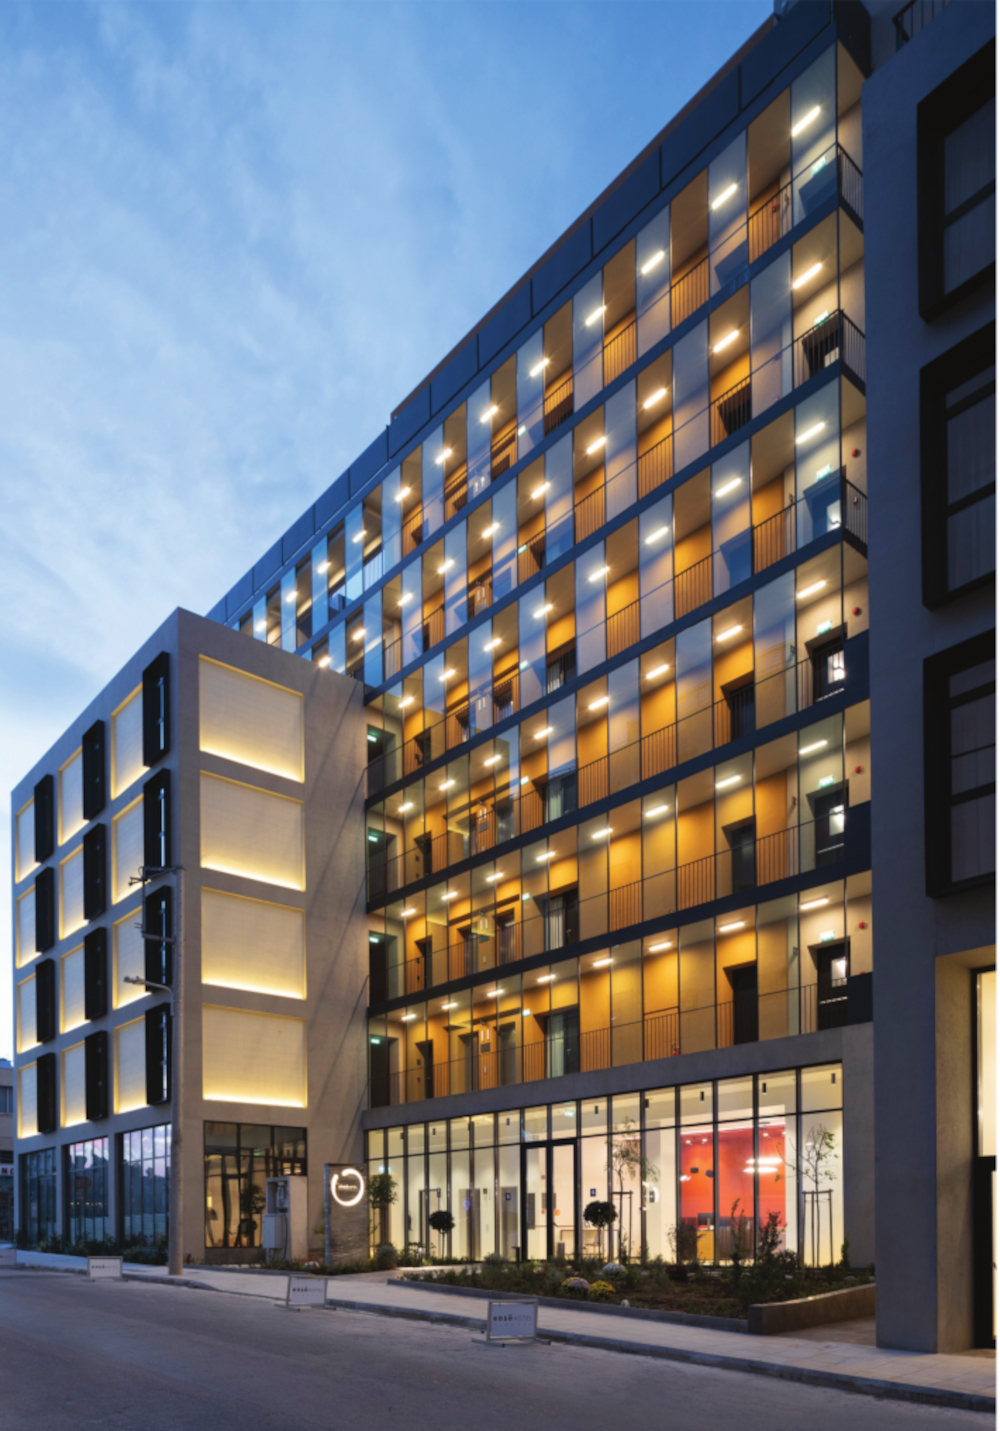 ENSO Hotel Piraeus by DIMAND, Final & Detail Architectural Design: ΑΤΕΜΑ Architects